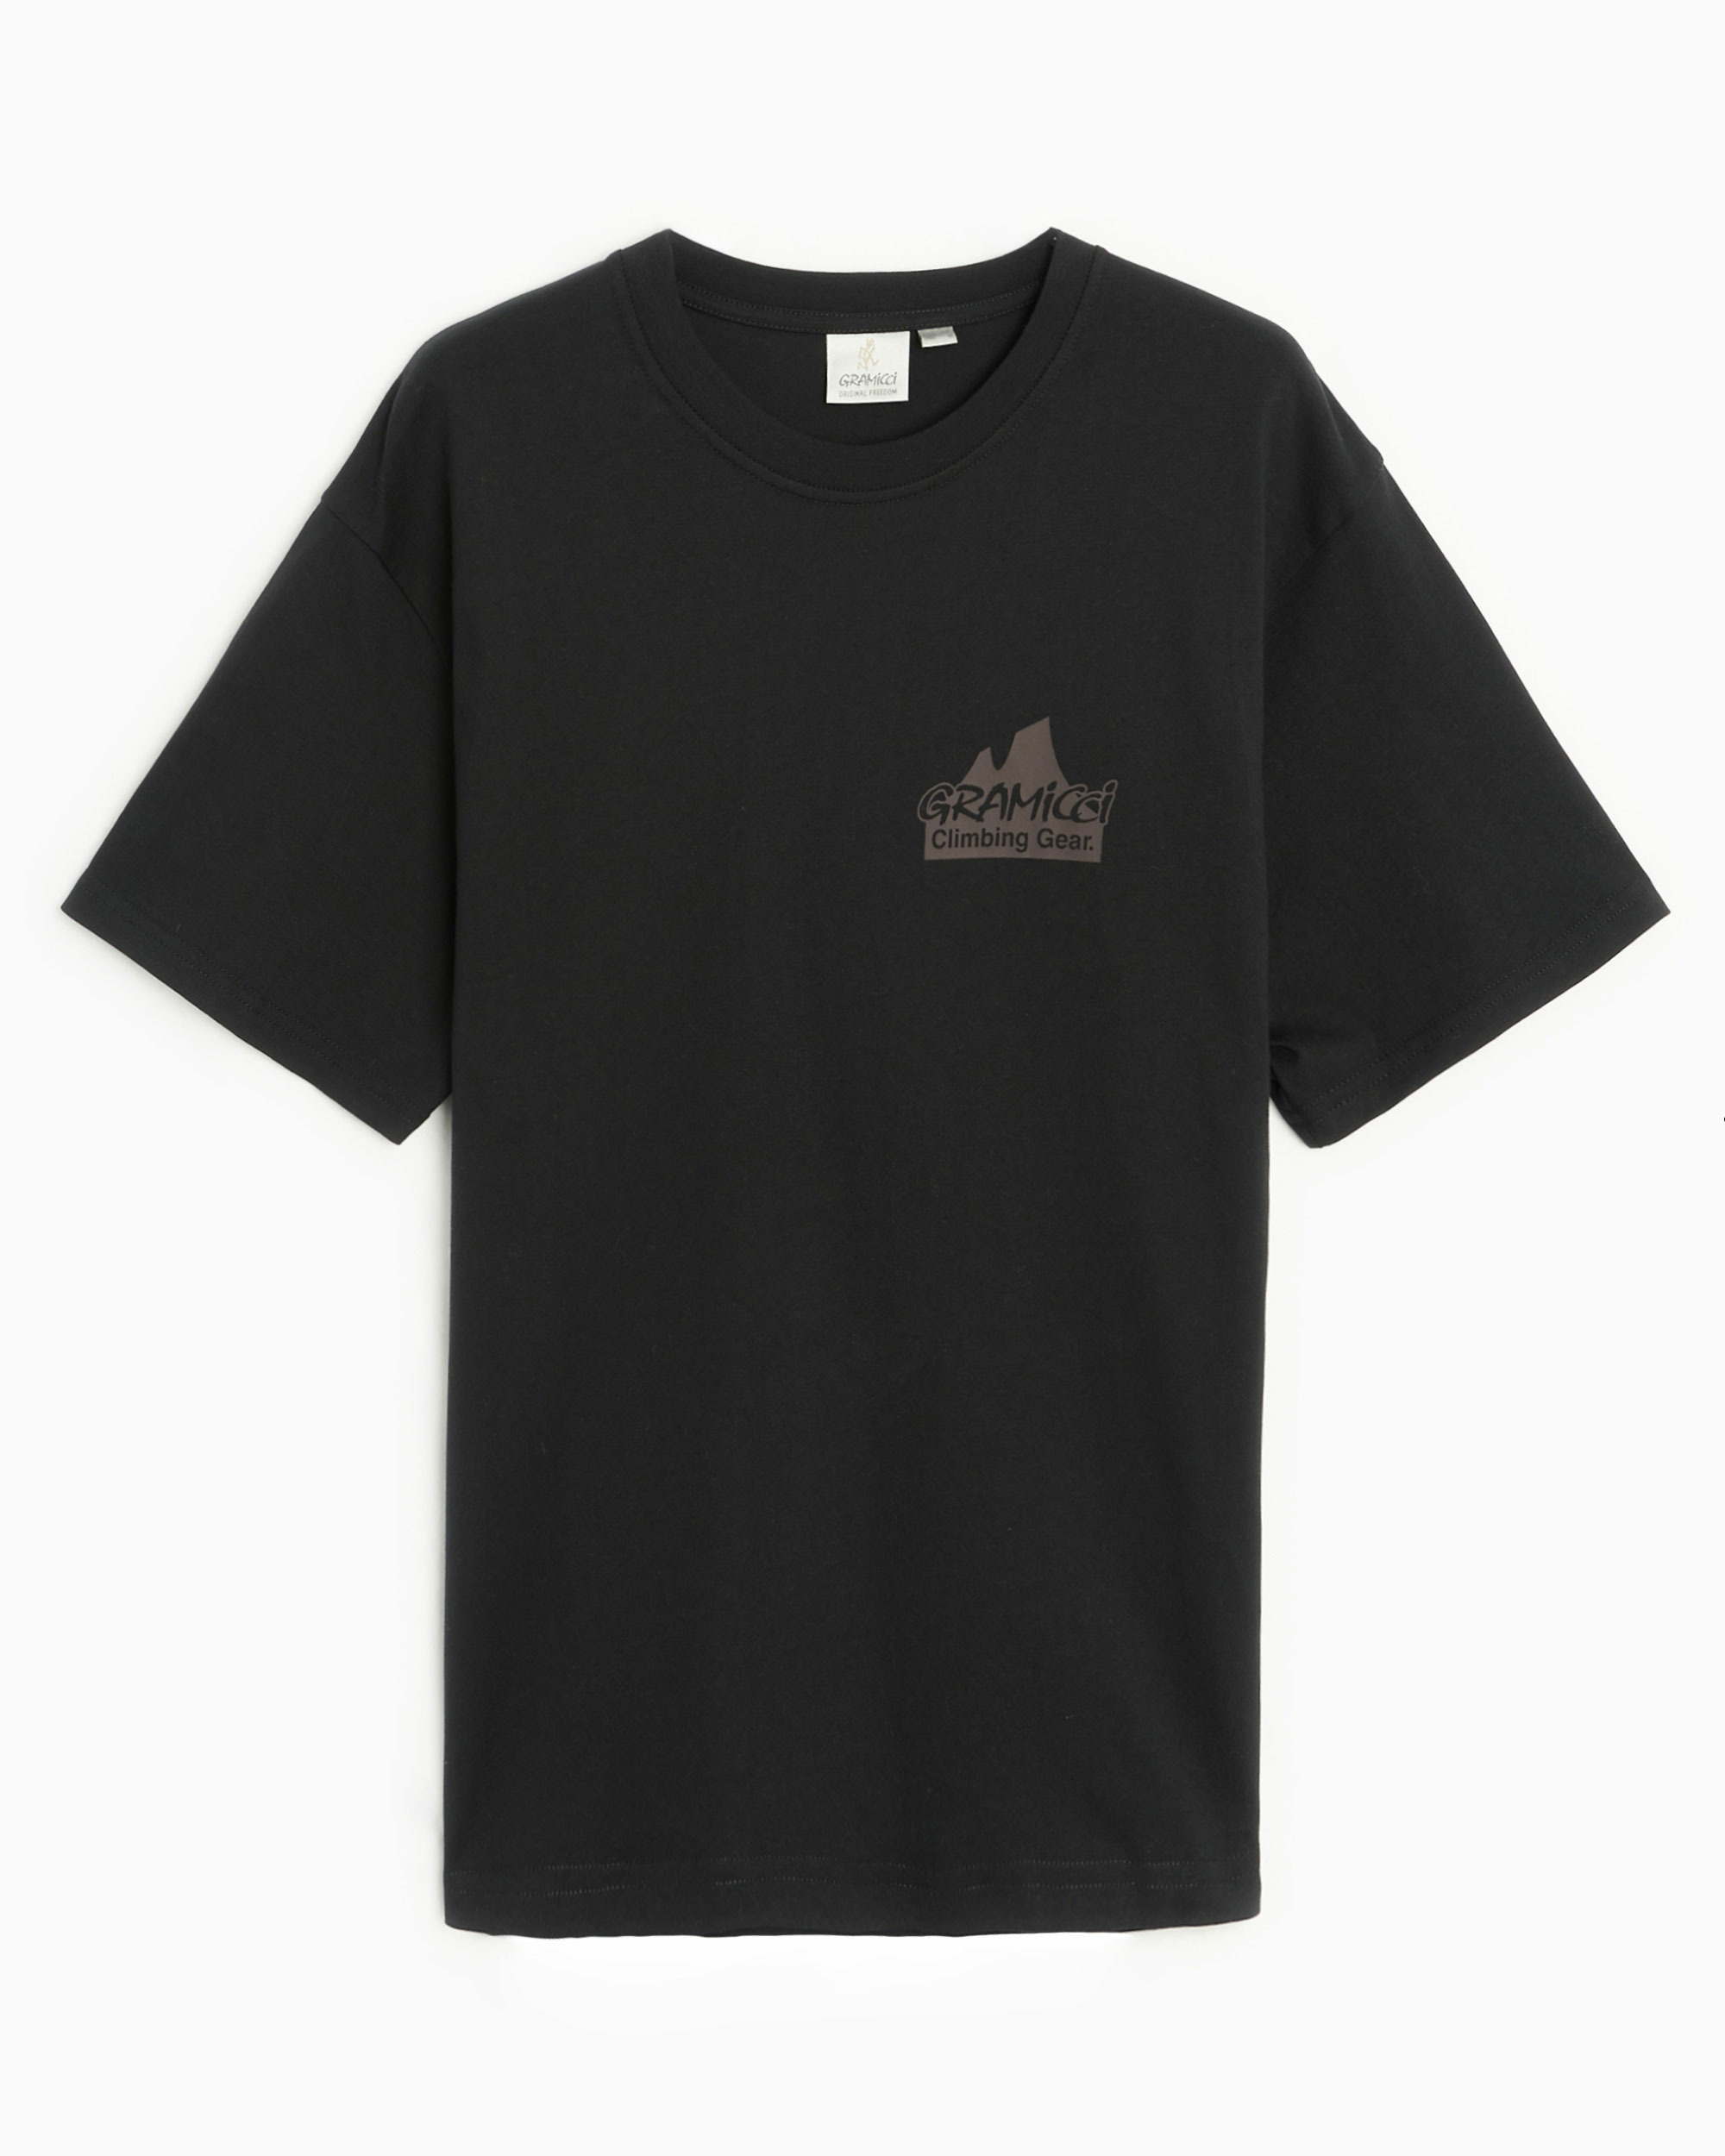 Picture of Gramicci | Climbing Gear Tee